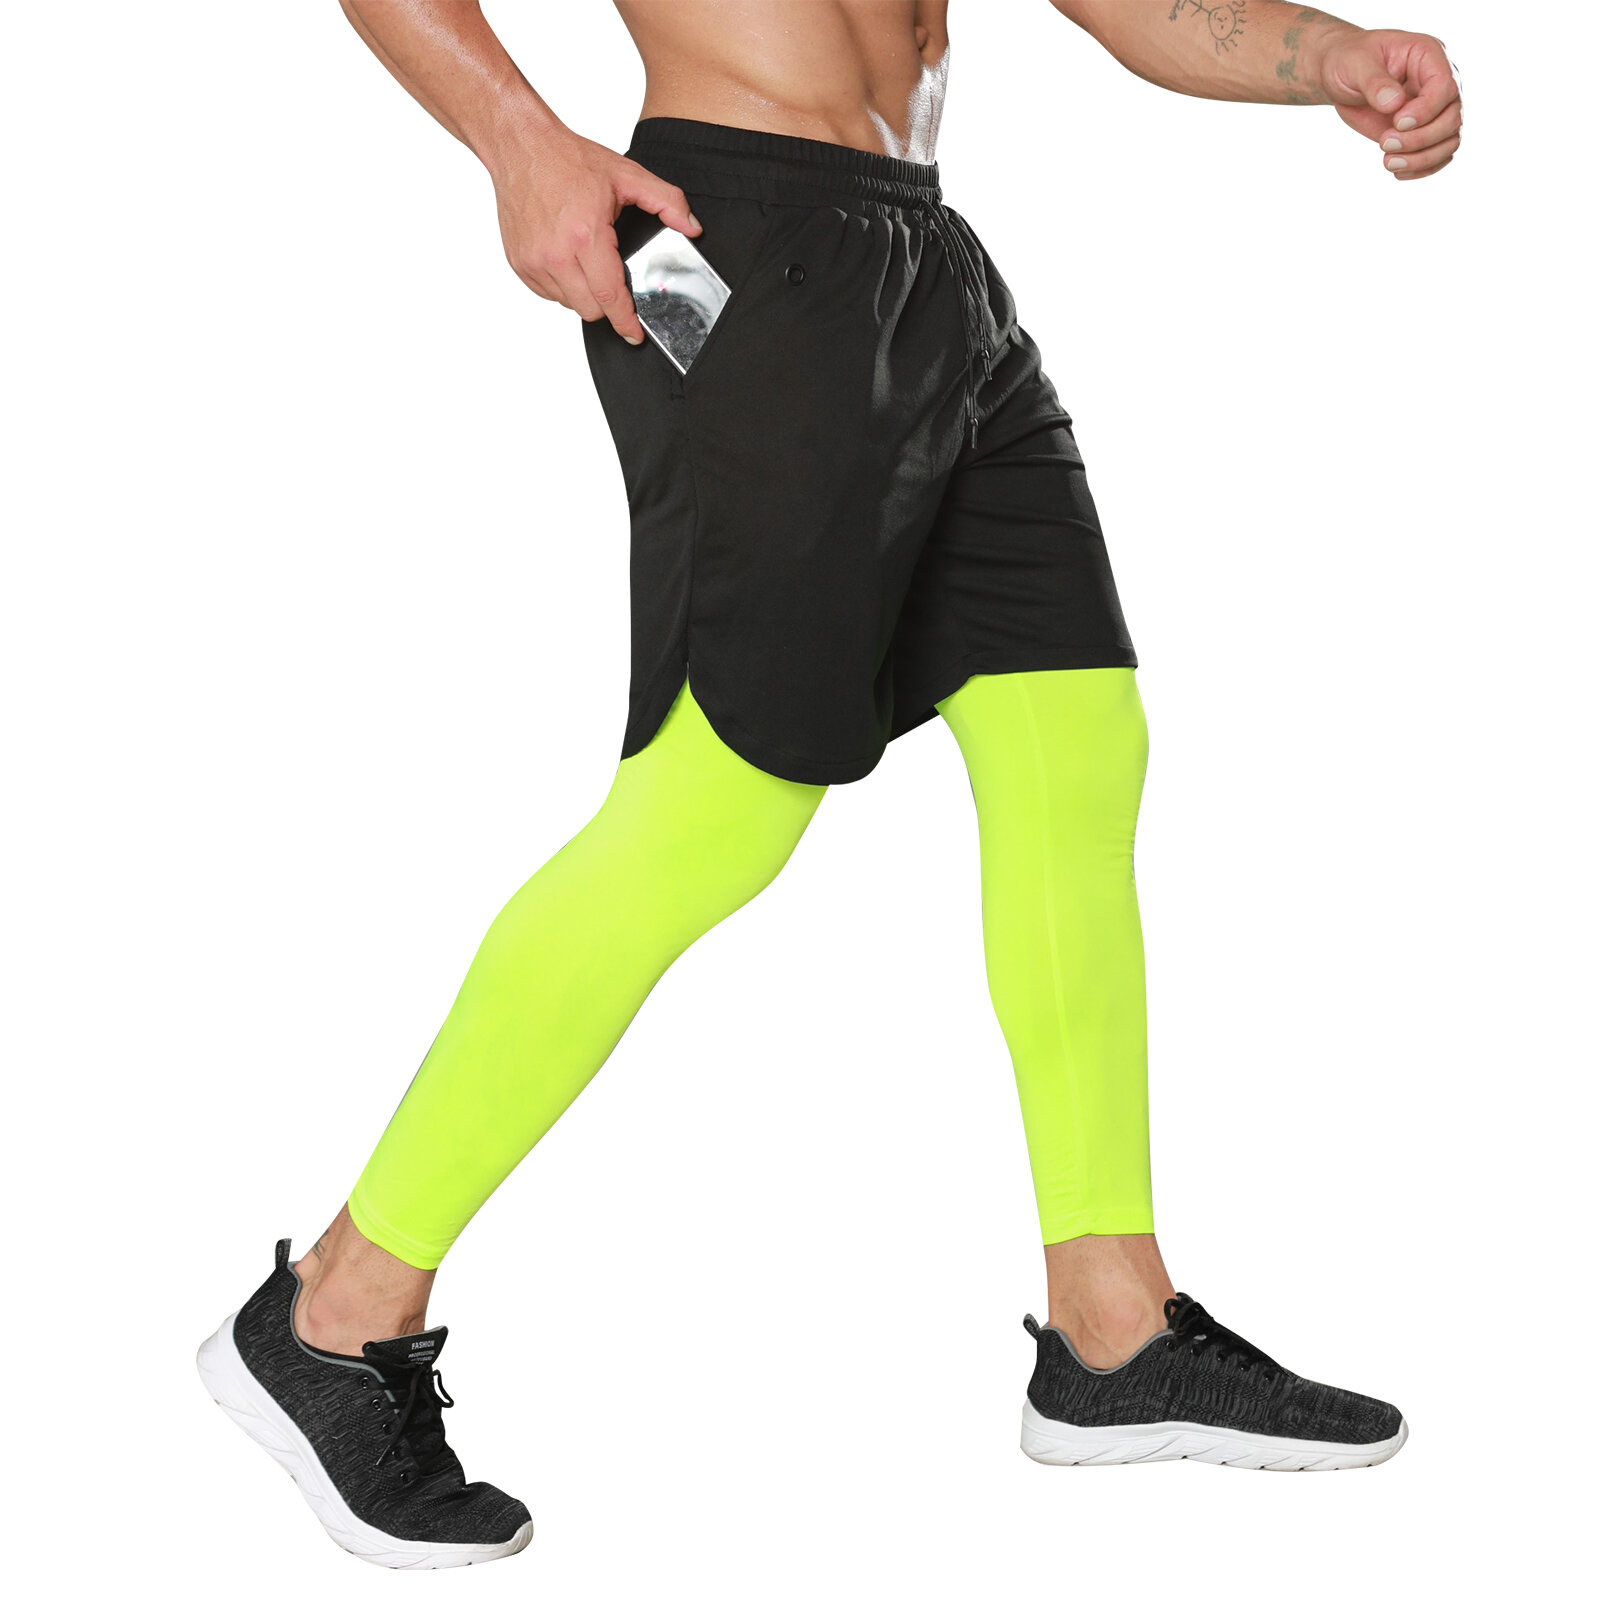 Men's Training Shorts with Leggings 2-in-1 DOUBLE UNDERS